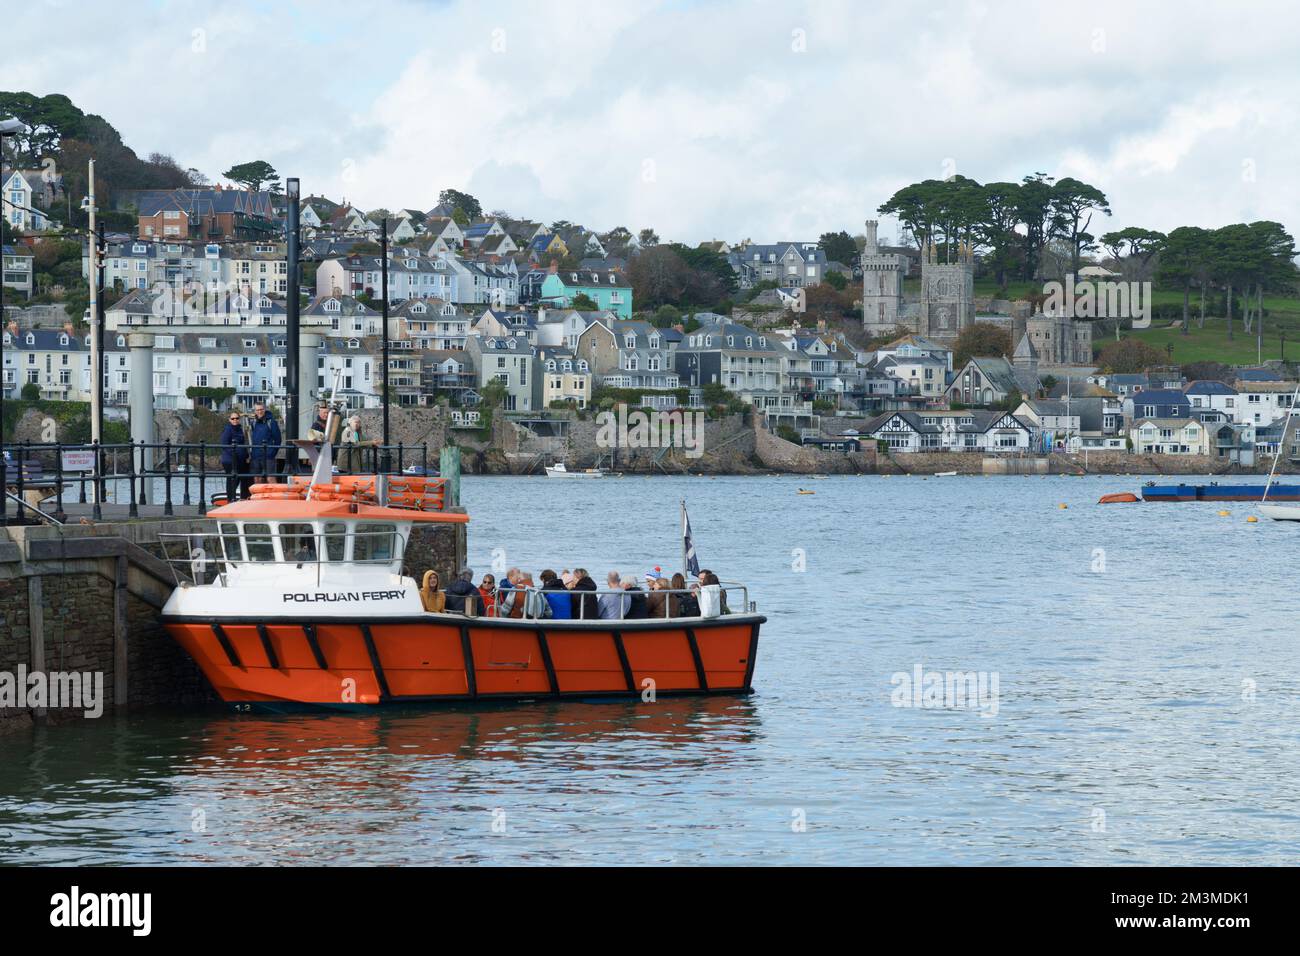 The pretty harbour villages of Fowey and Polruan on the South Cornish coast. Stock Photo